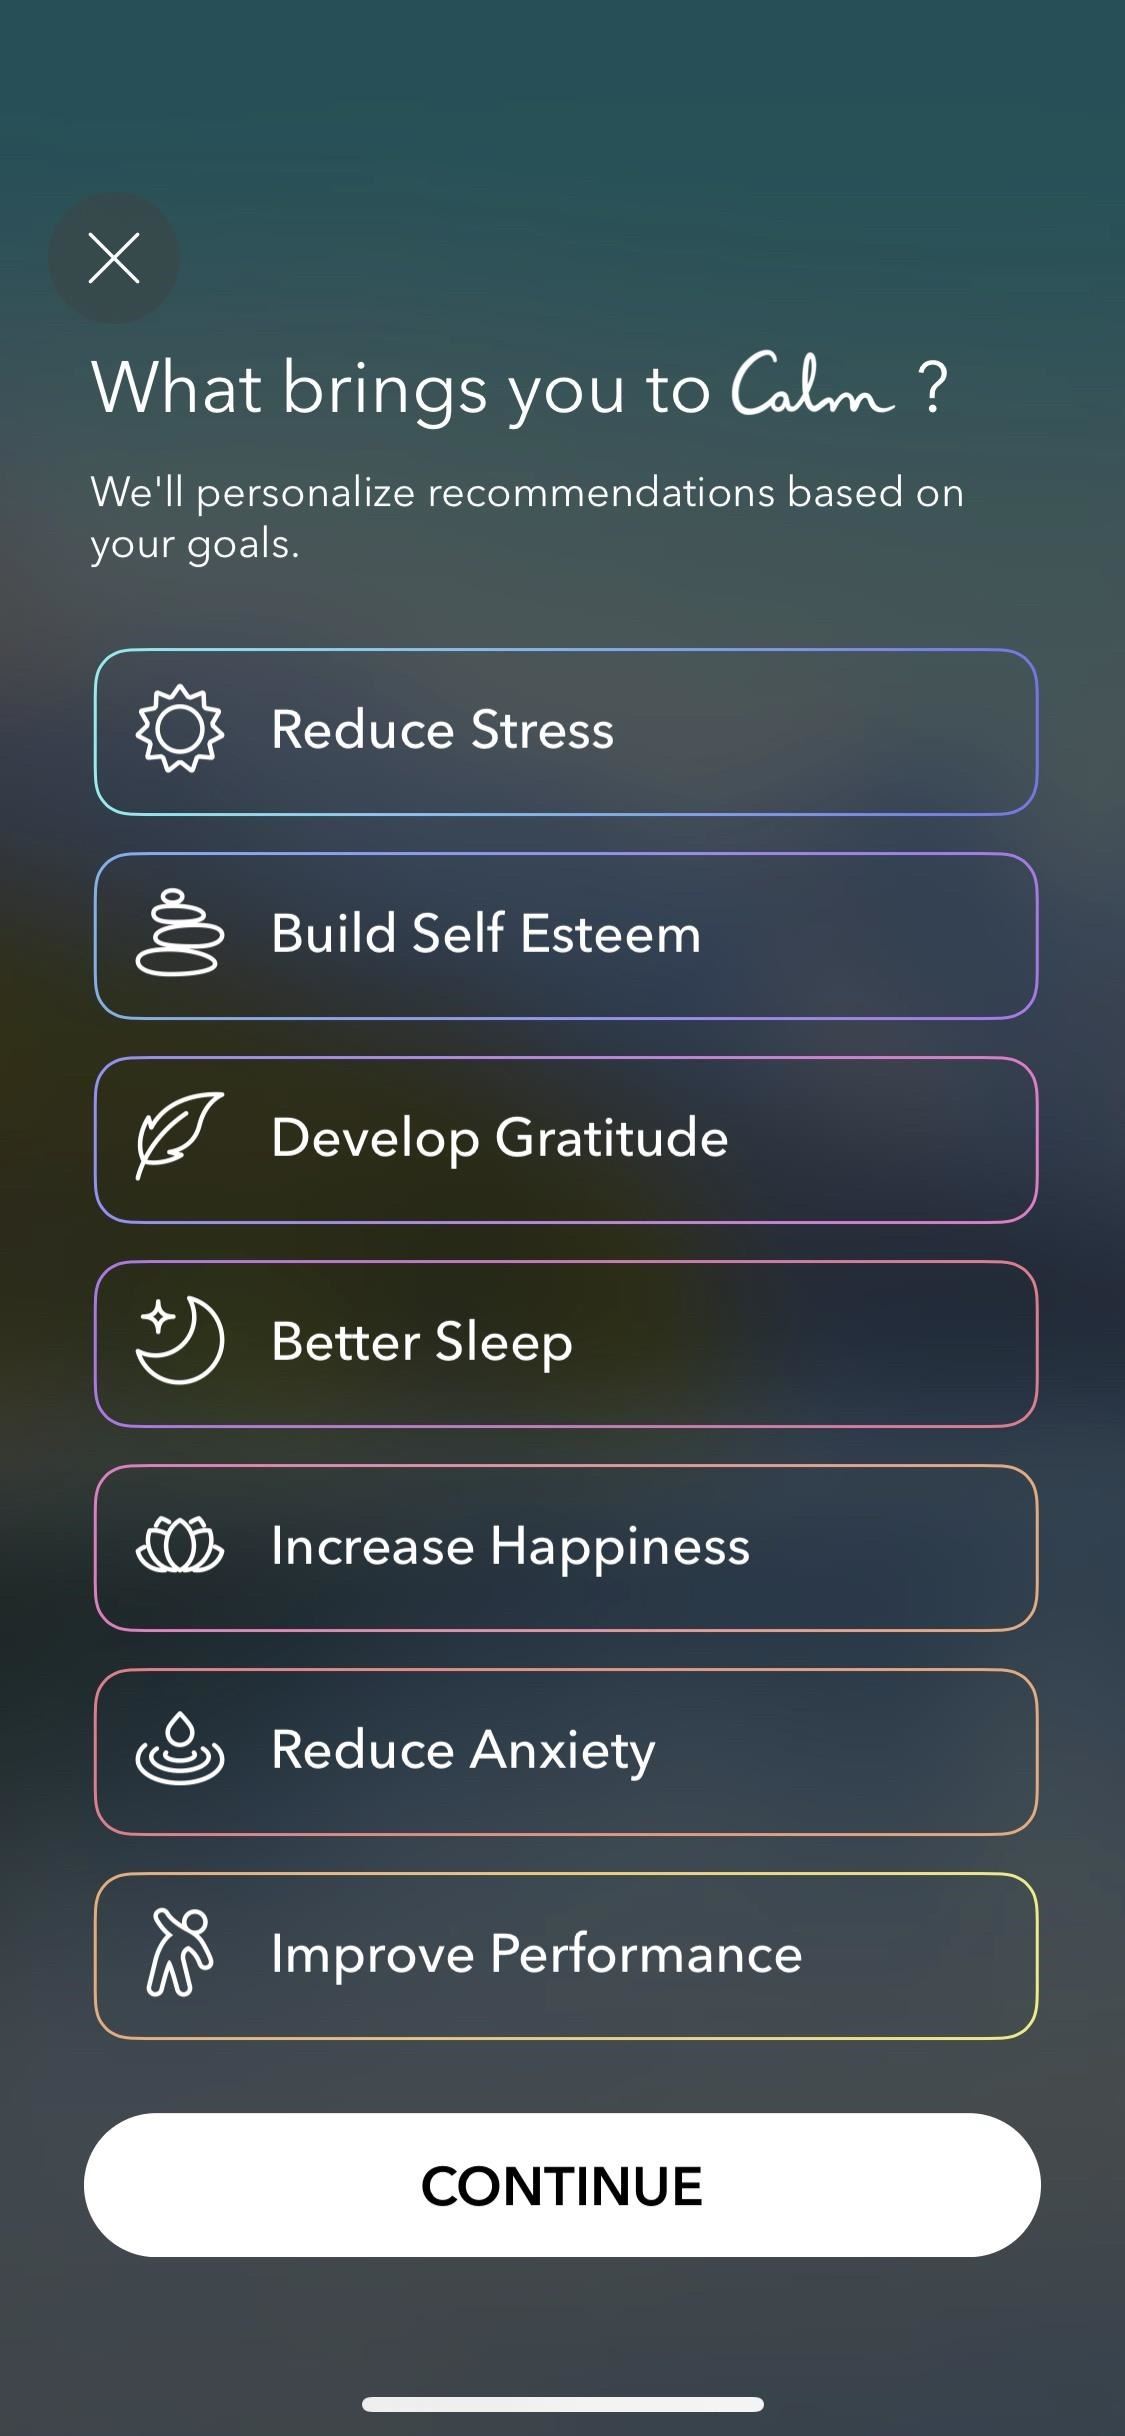 Ease Your Coronavirus Worries with These Meditation Apps